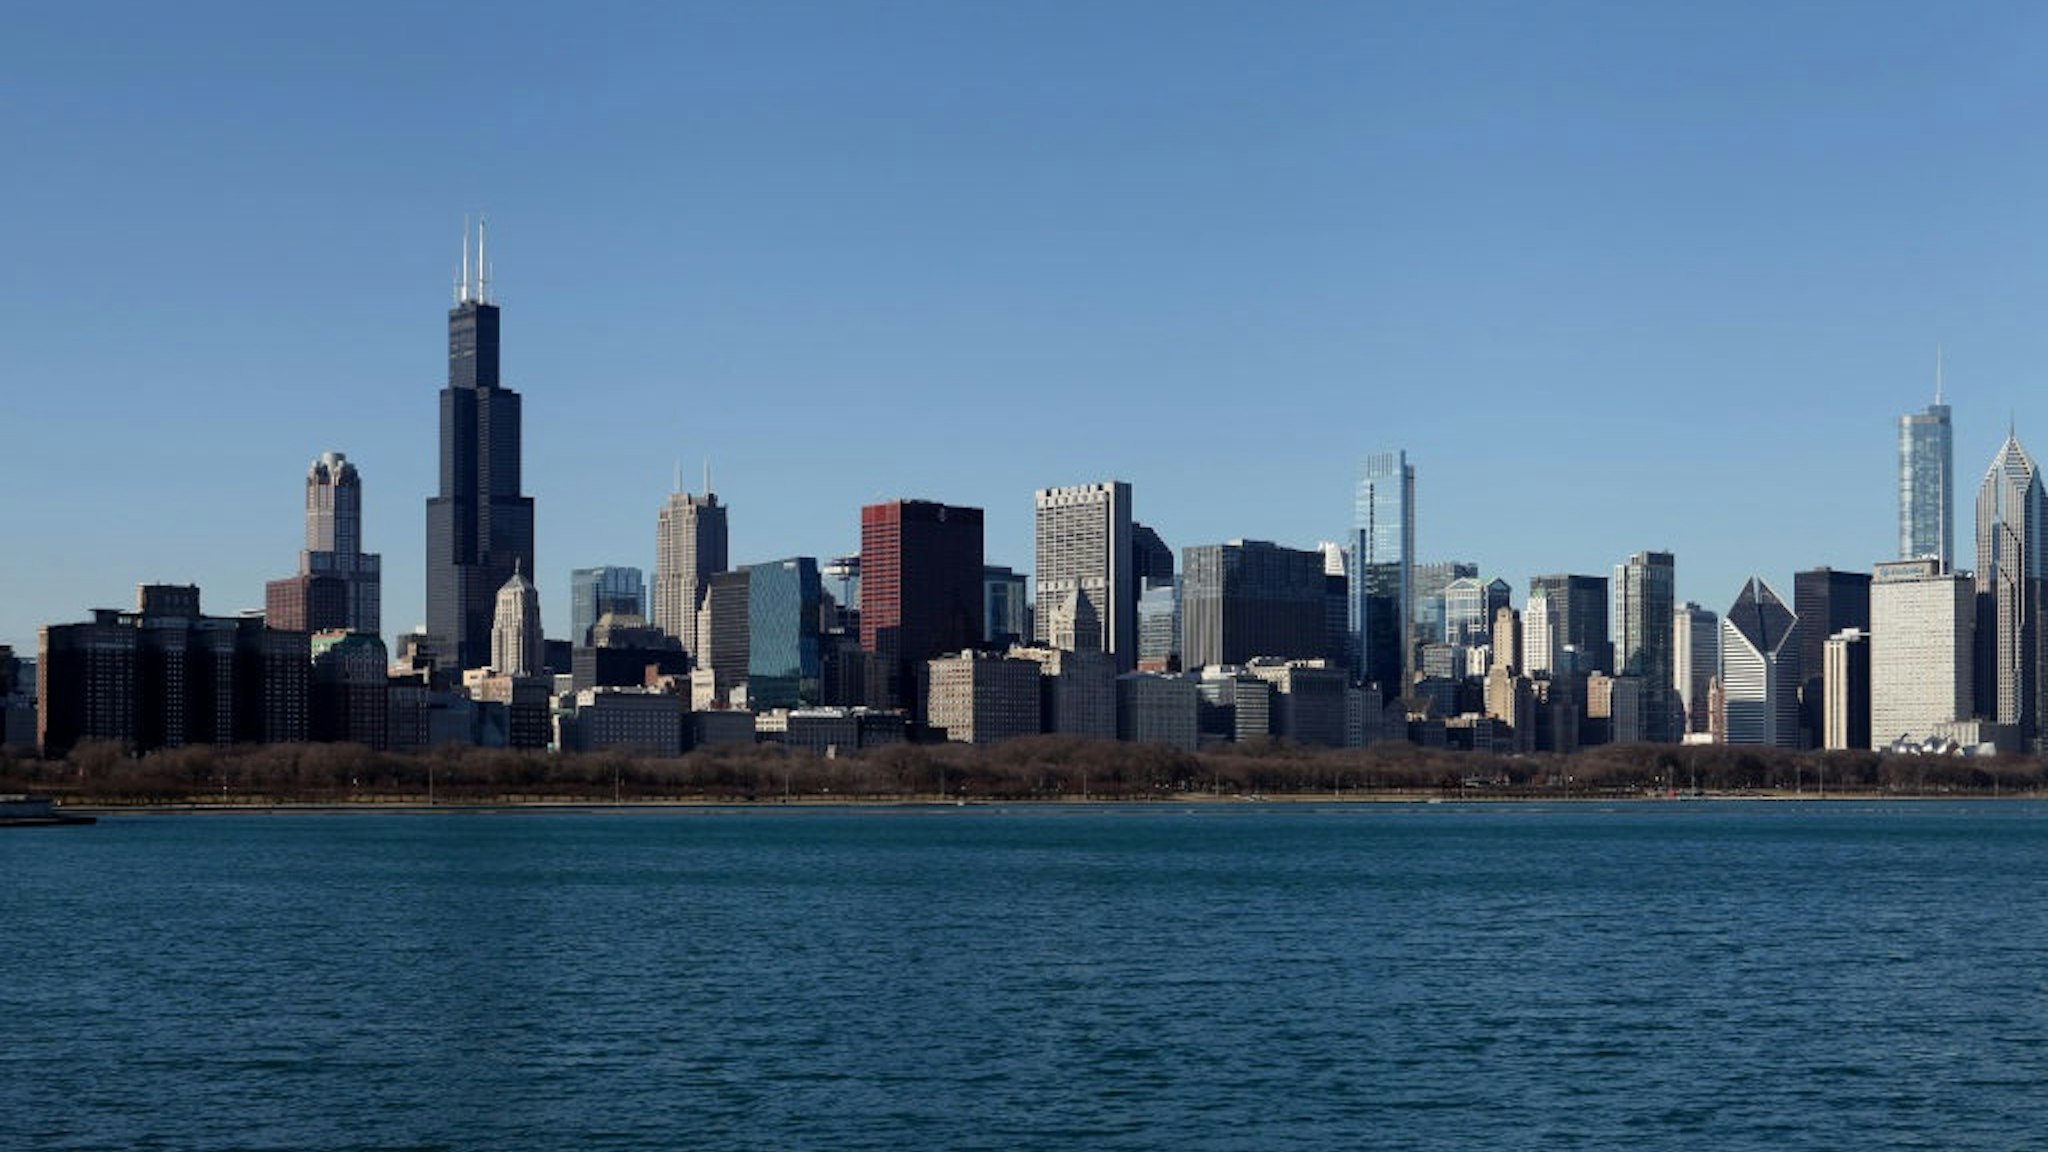 CHICAGO - JANUARY 07: Chicago skyline, photographed from outside Adler Planetarium in Chicago, Illinois on January 7, 2020.